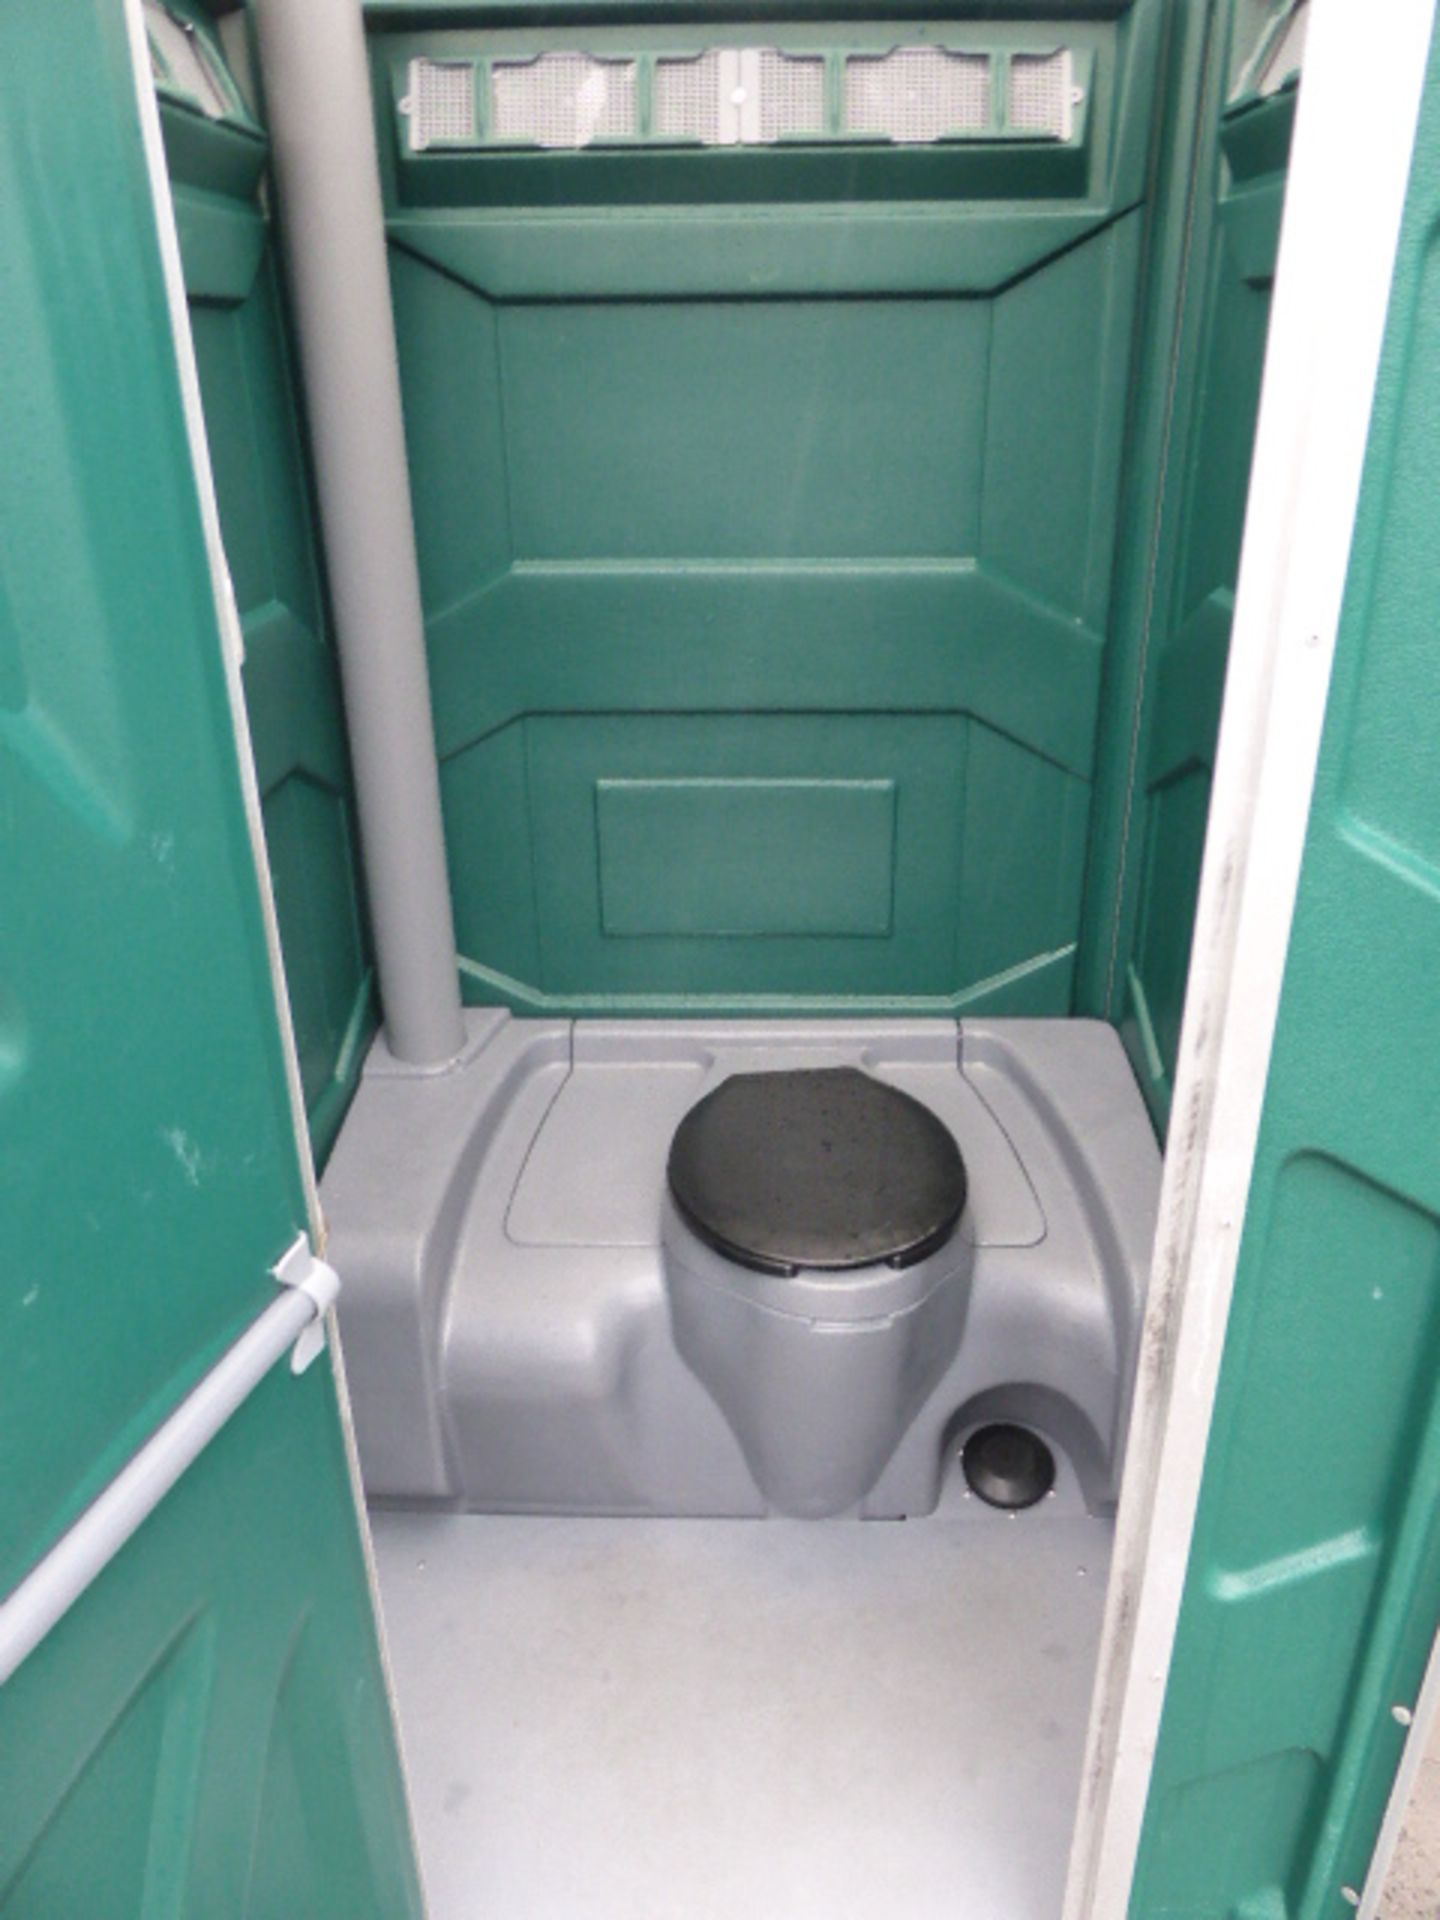 Polyjohn green individual single unisex chemical event toilet with hand sanitizer and paper towel - Image 2 of 2